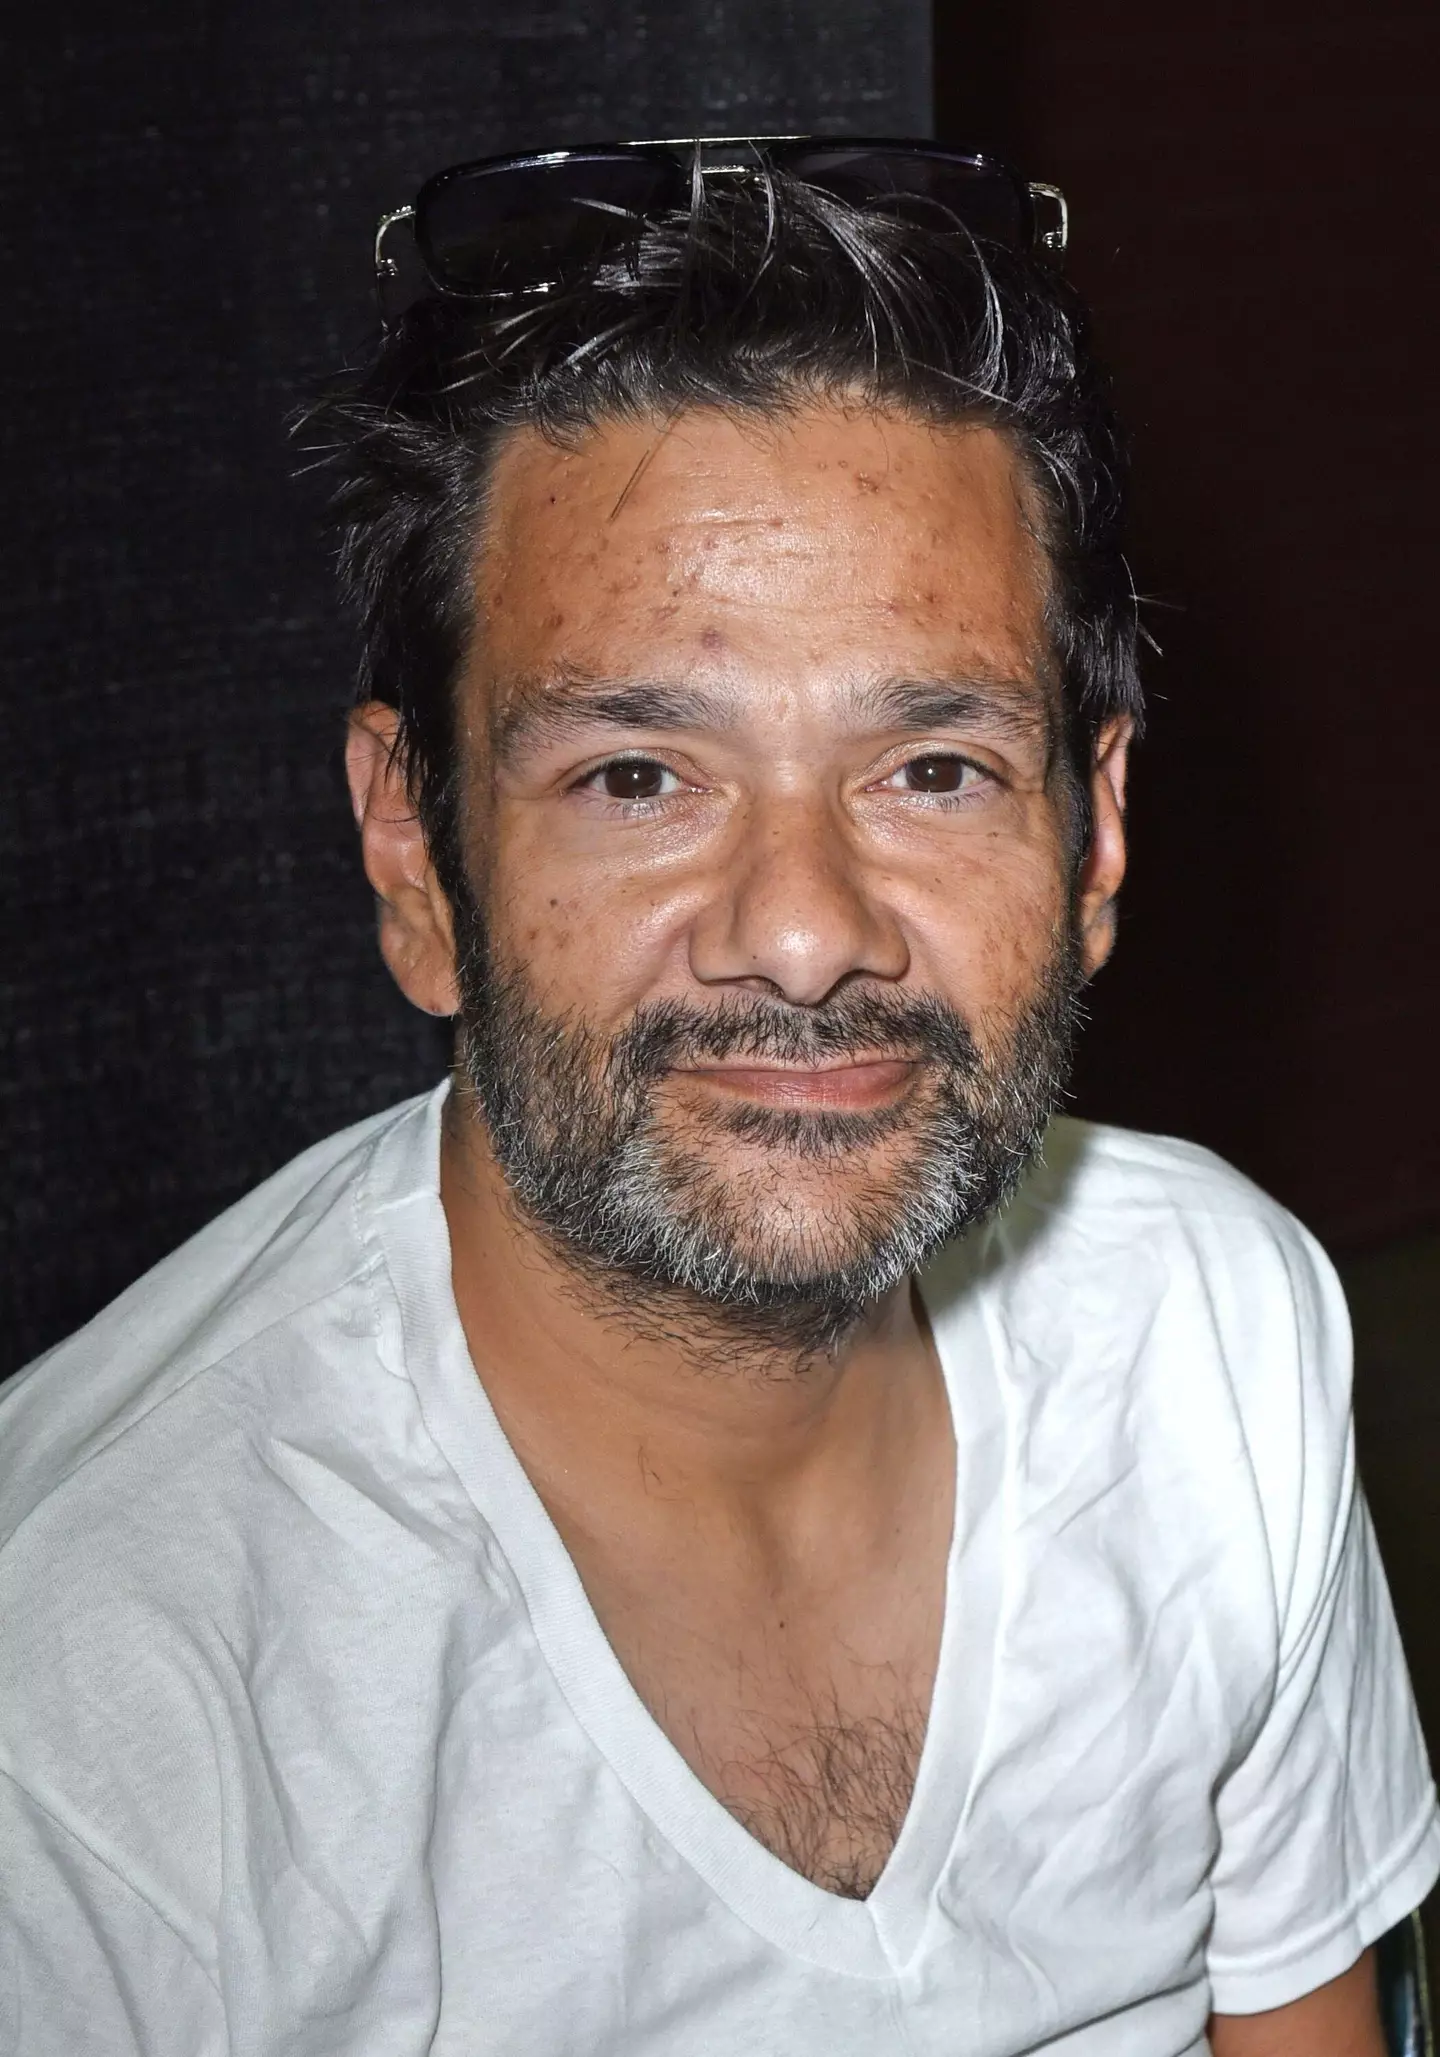 Shaun Weiss has been looking so much better since going clean.